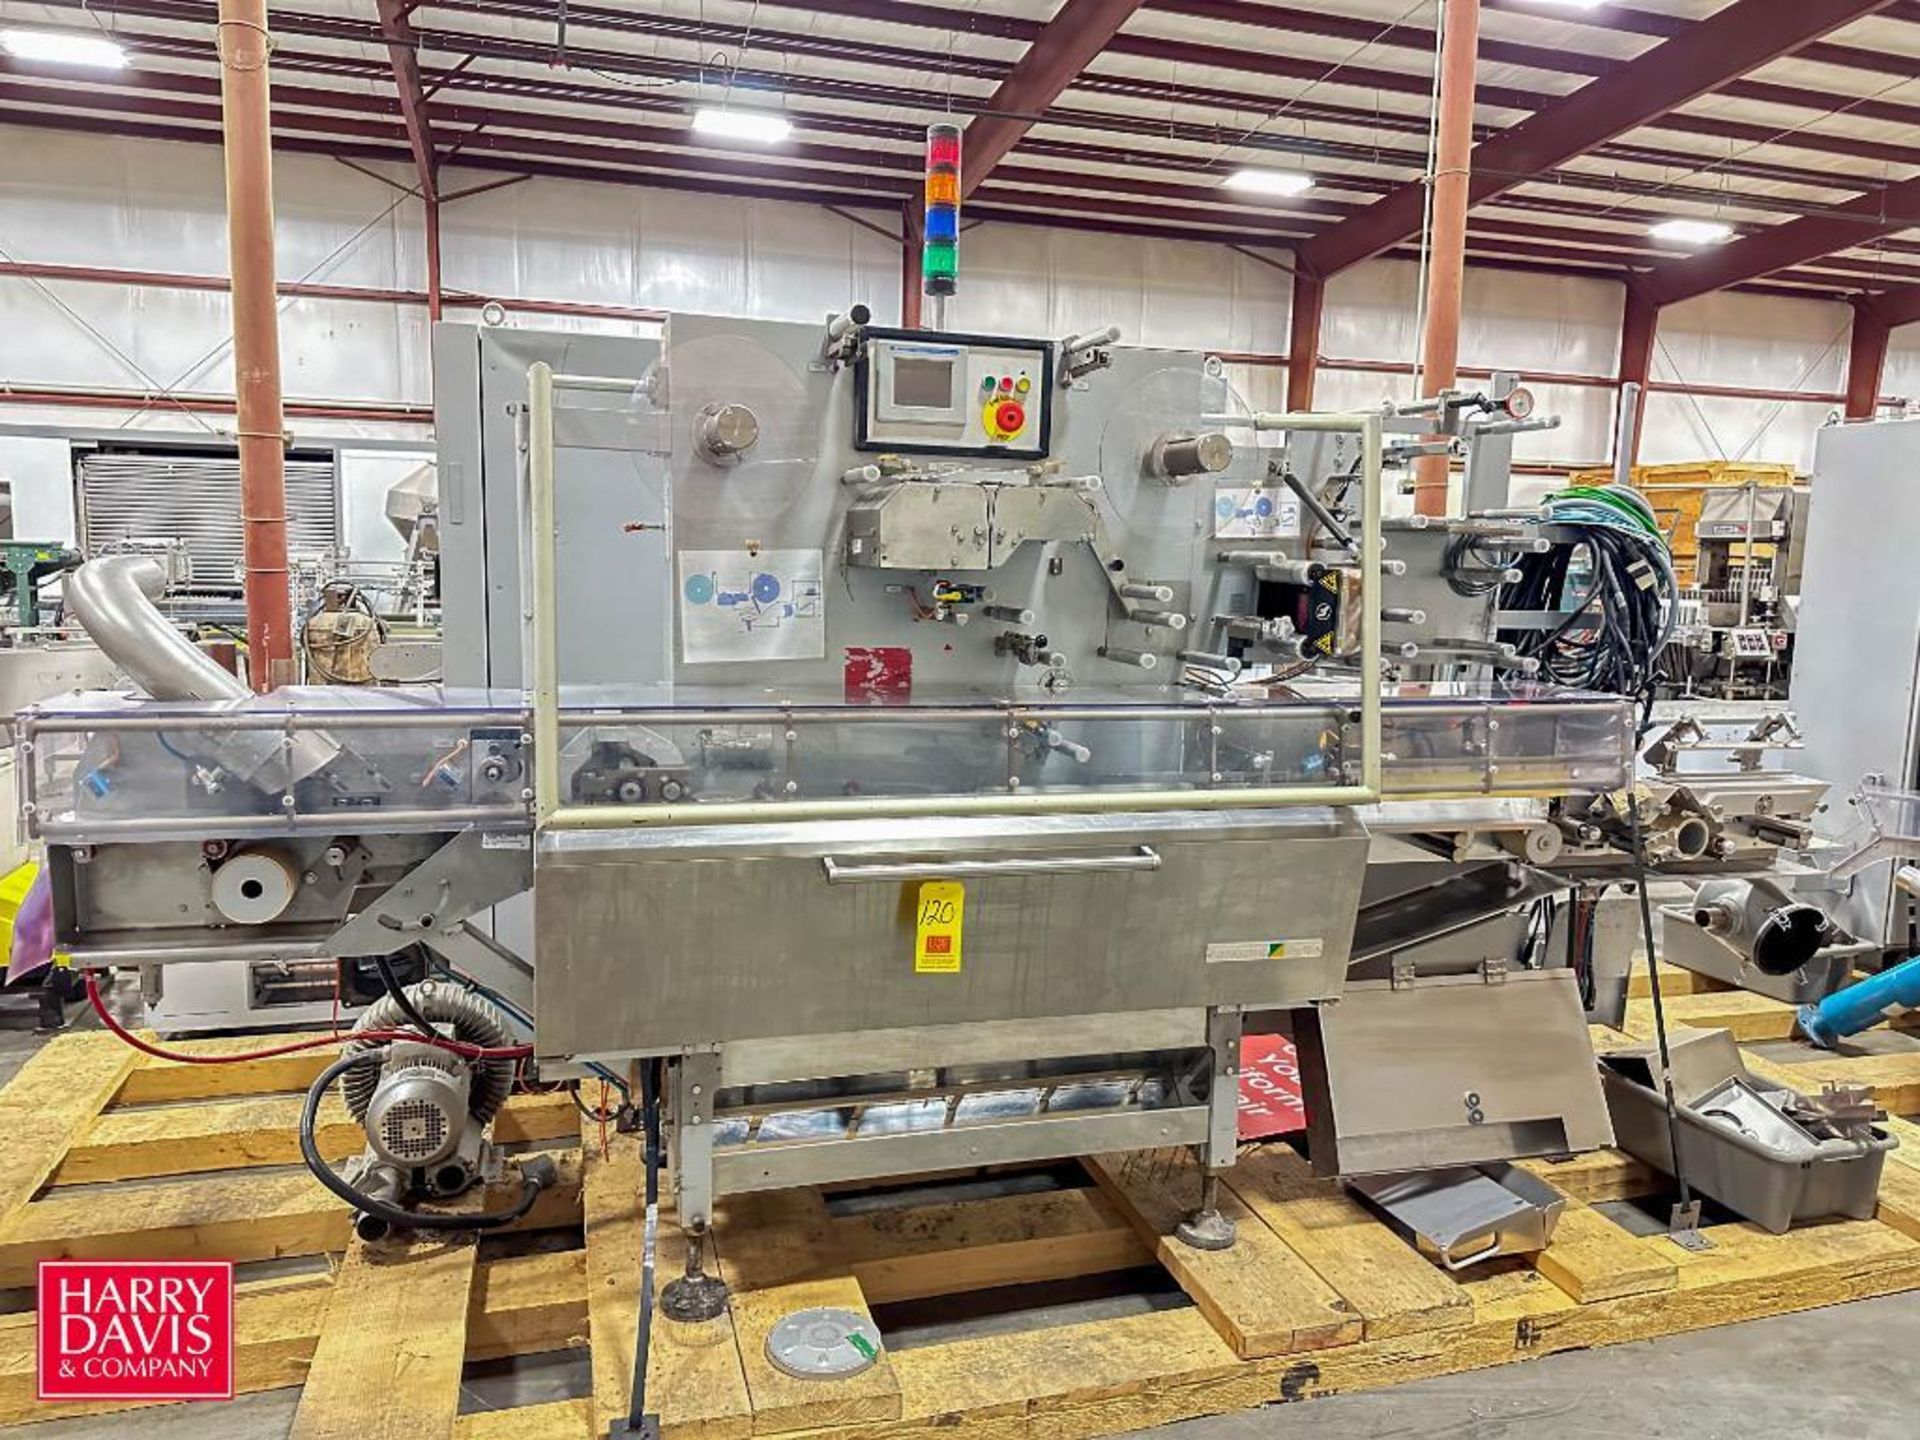 THEEGARTEN PACTEC Wrapper, Model: FPC5, S/N: FPC5006 with Vacuum Blower and Allen-Bradley PanelView